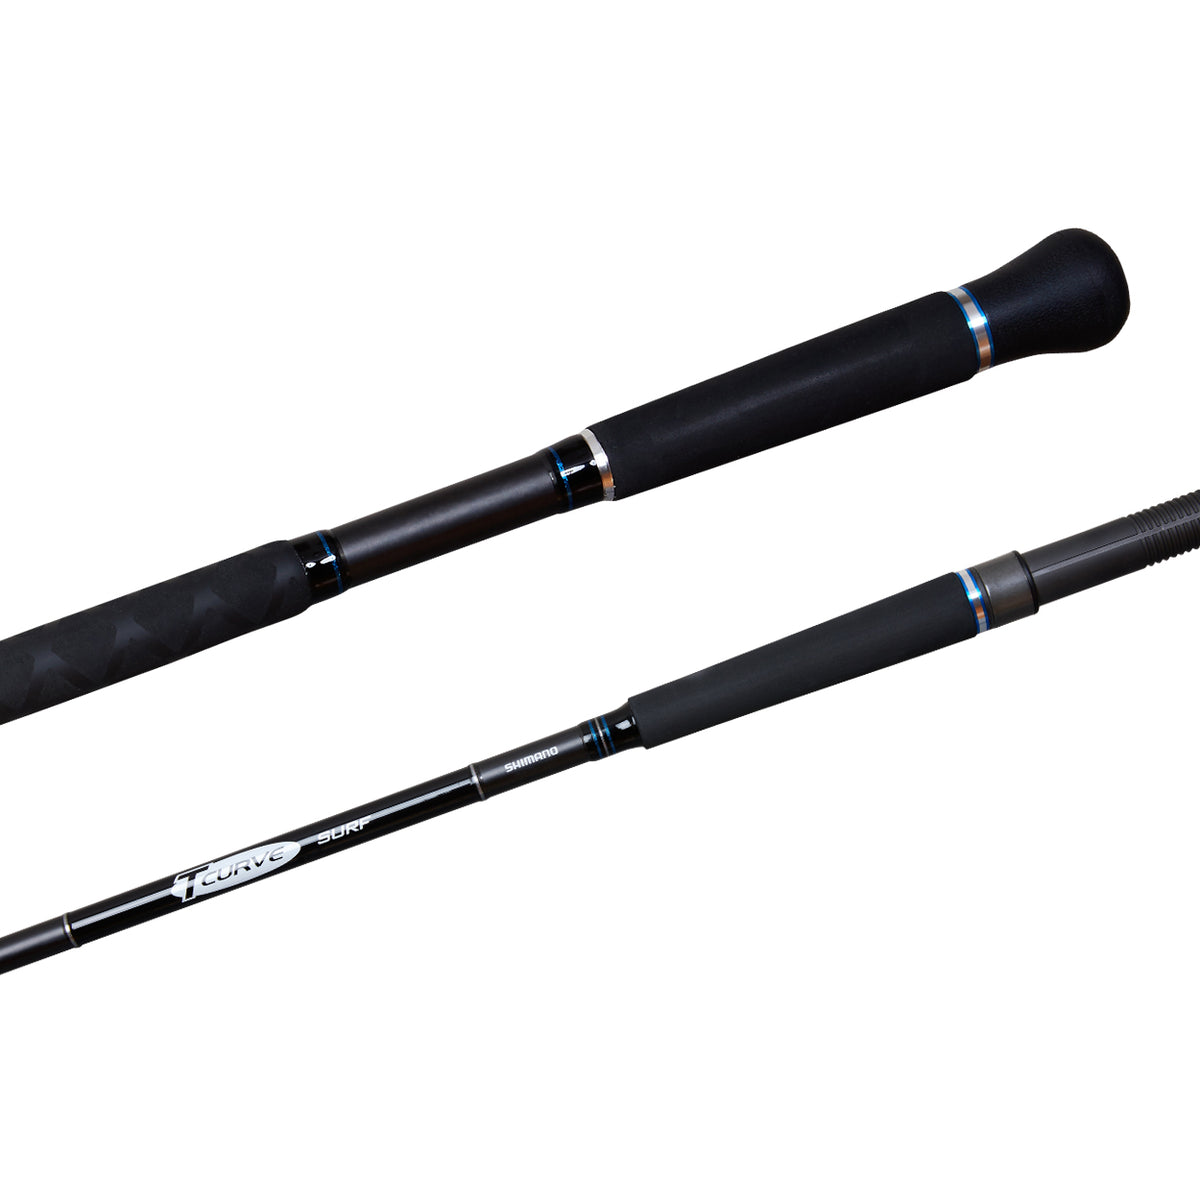 22 SHIMANO T CURVE SURF SPINNING FISHING ROD